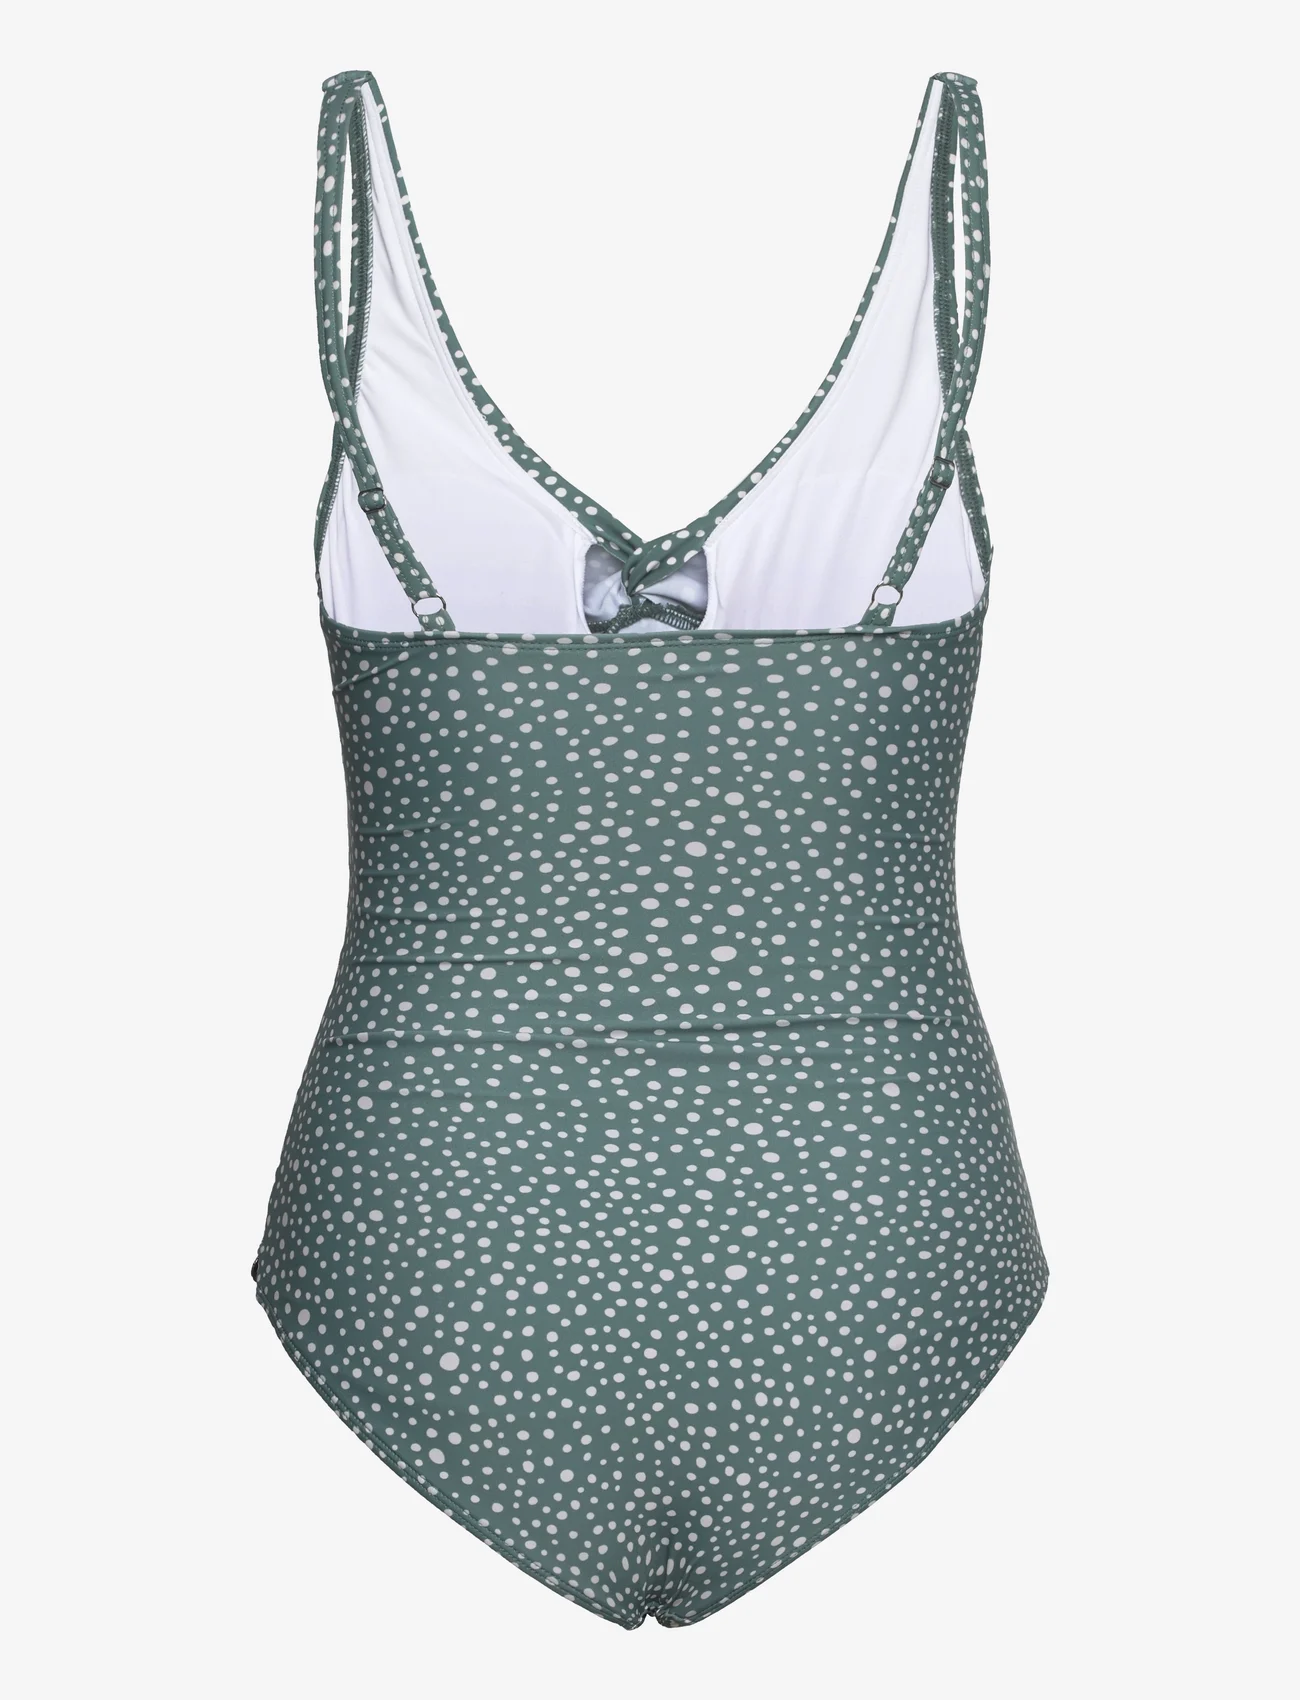 Panos Emporio - Ditsy Dots Simi Swimsuit - badedragter - deep jungle - 1